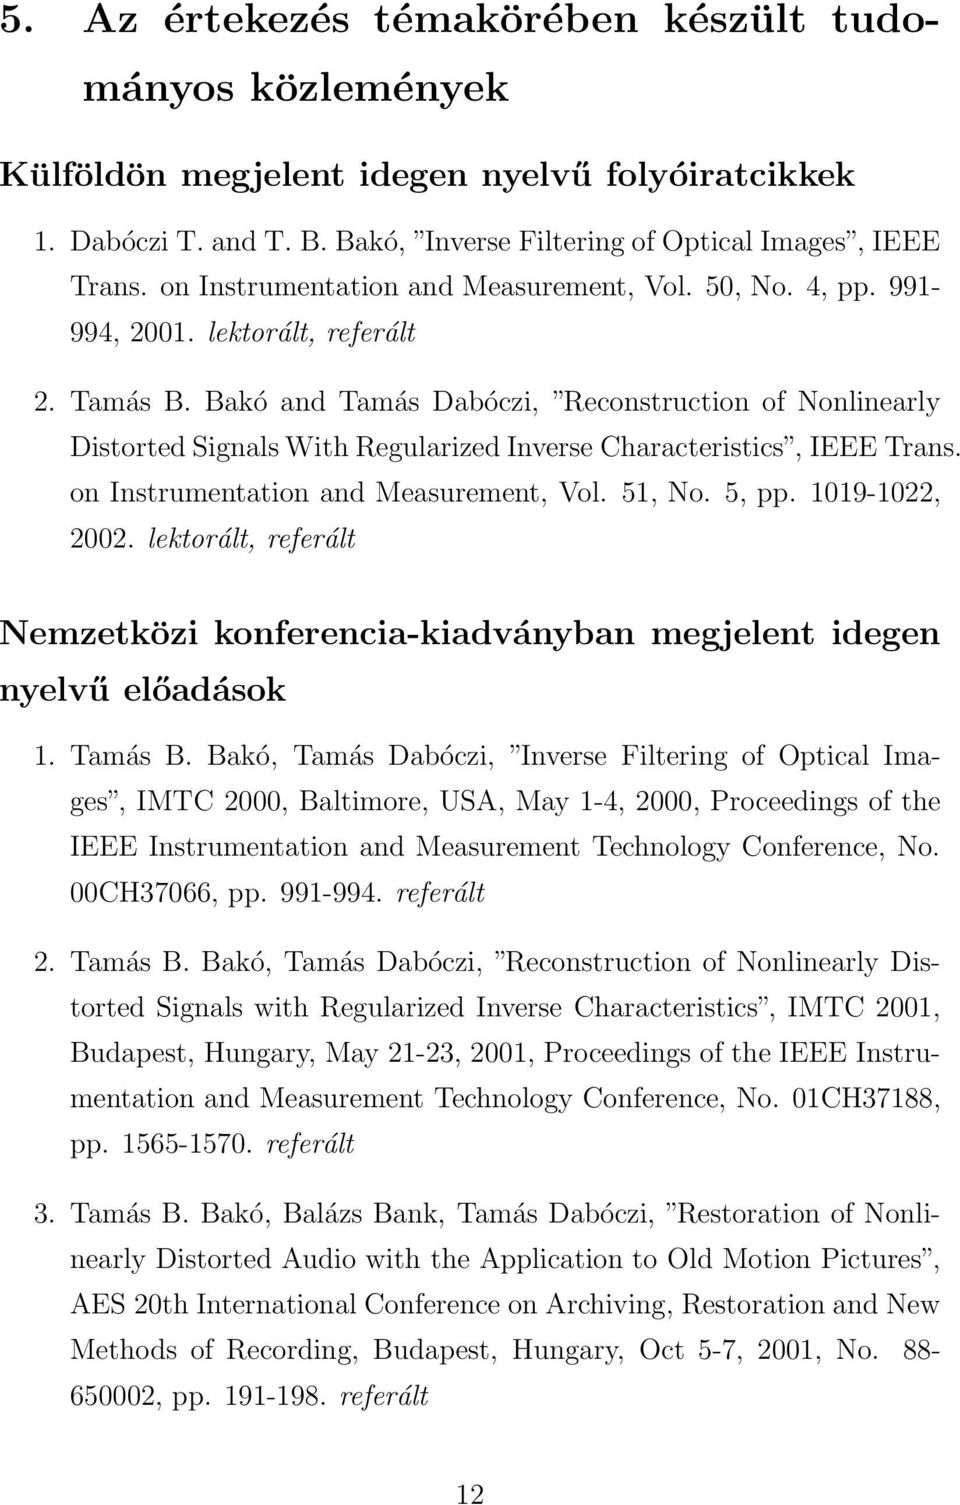 Bakó andtamás Dabóczi, Reconstruction of Nonlinearly Distorted Signals With Regularized Inverse Characteristics, IEEE Trans. on Instrumentation and Measurement, Vol. 51, No. 5, pp. 1019-1022, 2002.